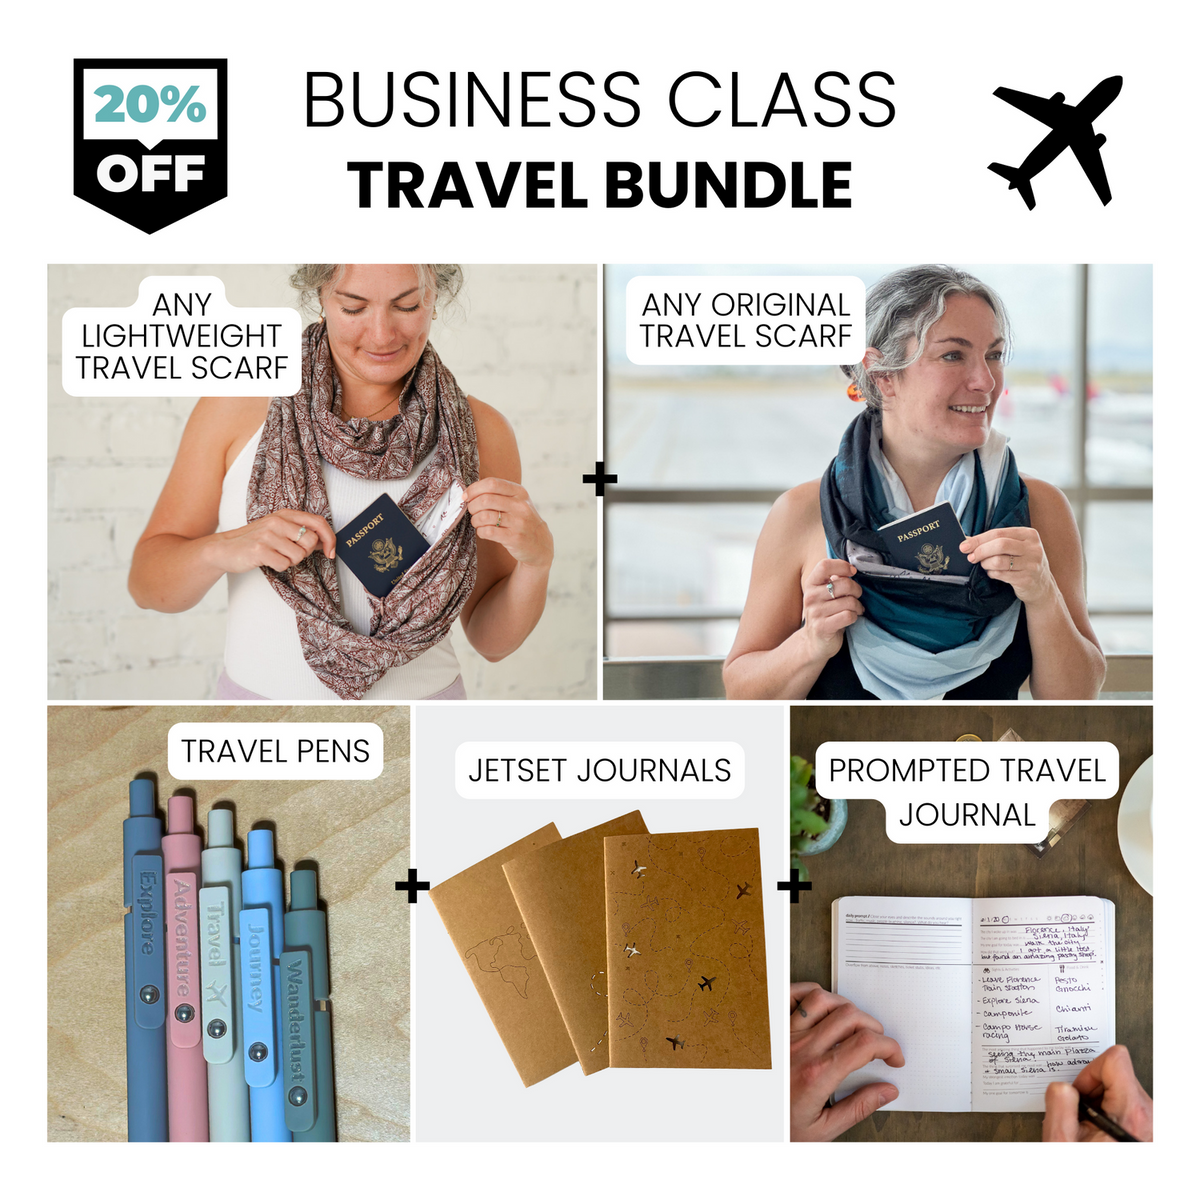 Finds Under $20 That Make Great Gifts - A Jetset Journal